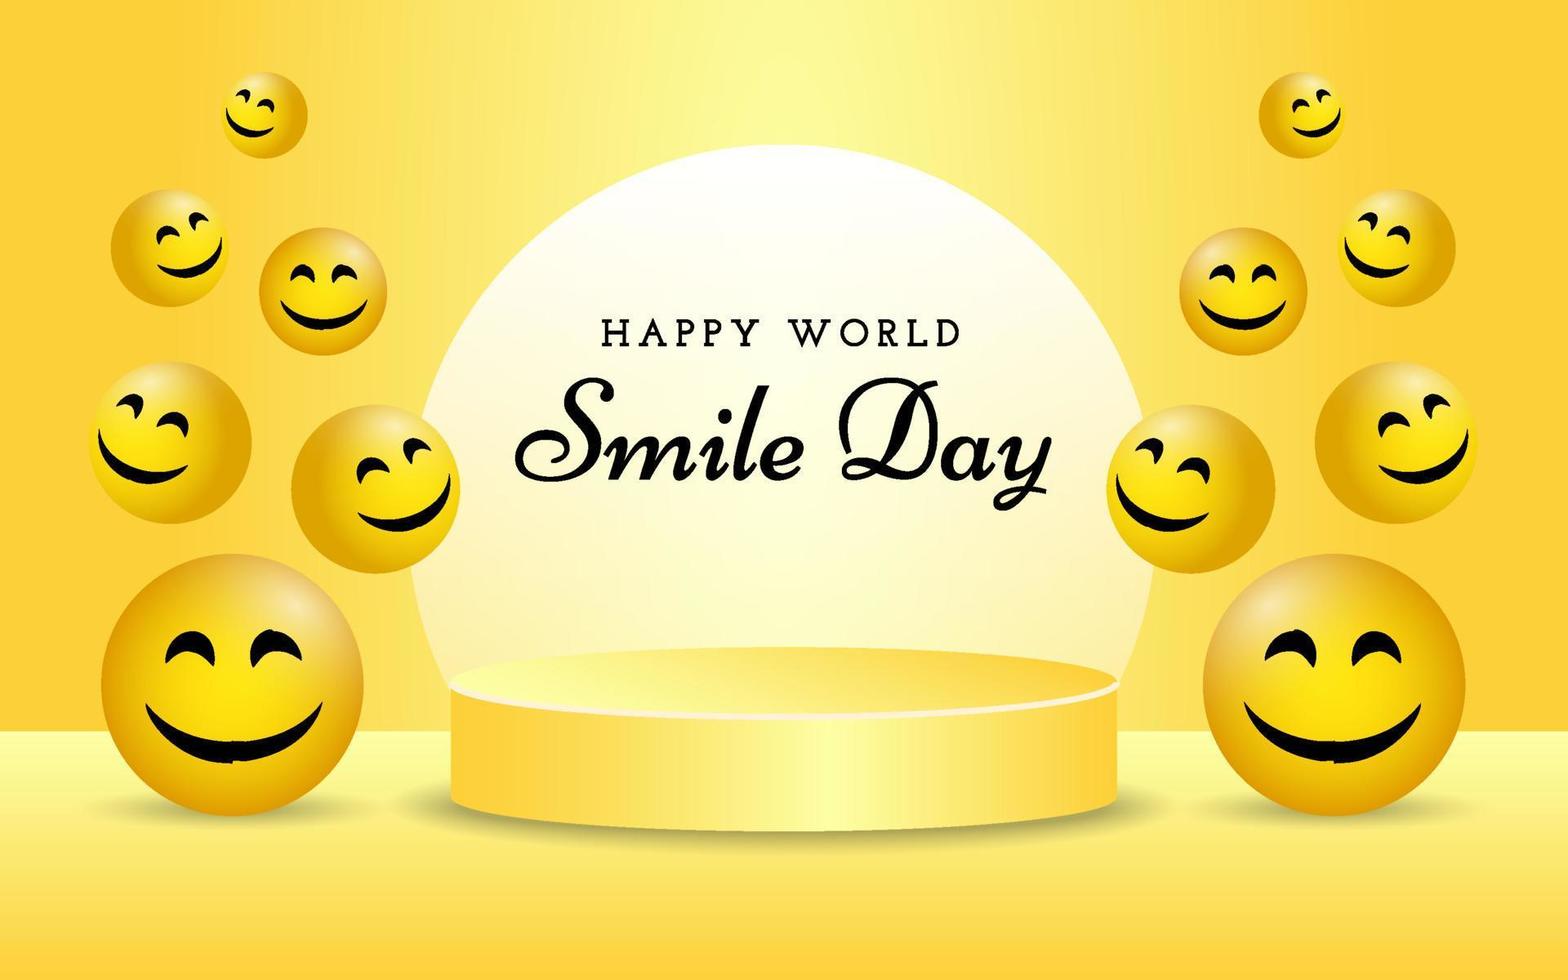 Happy World Smile Day Greeting Card Template vector